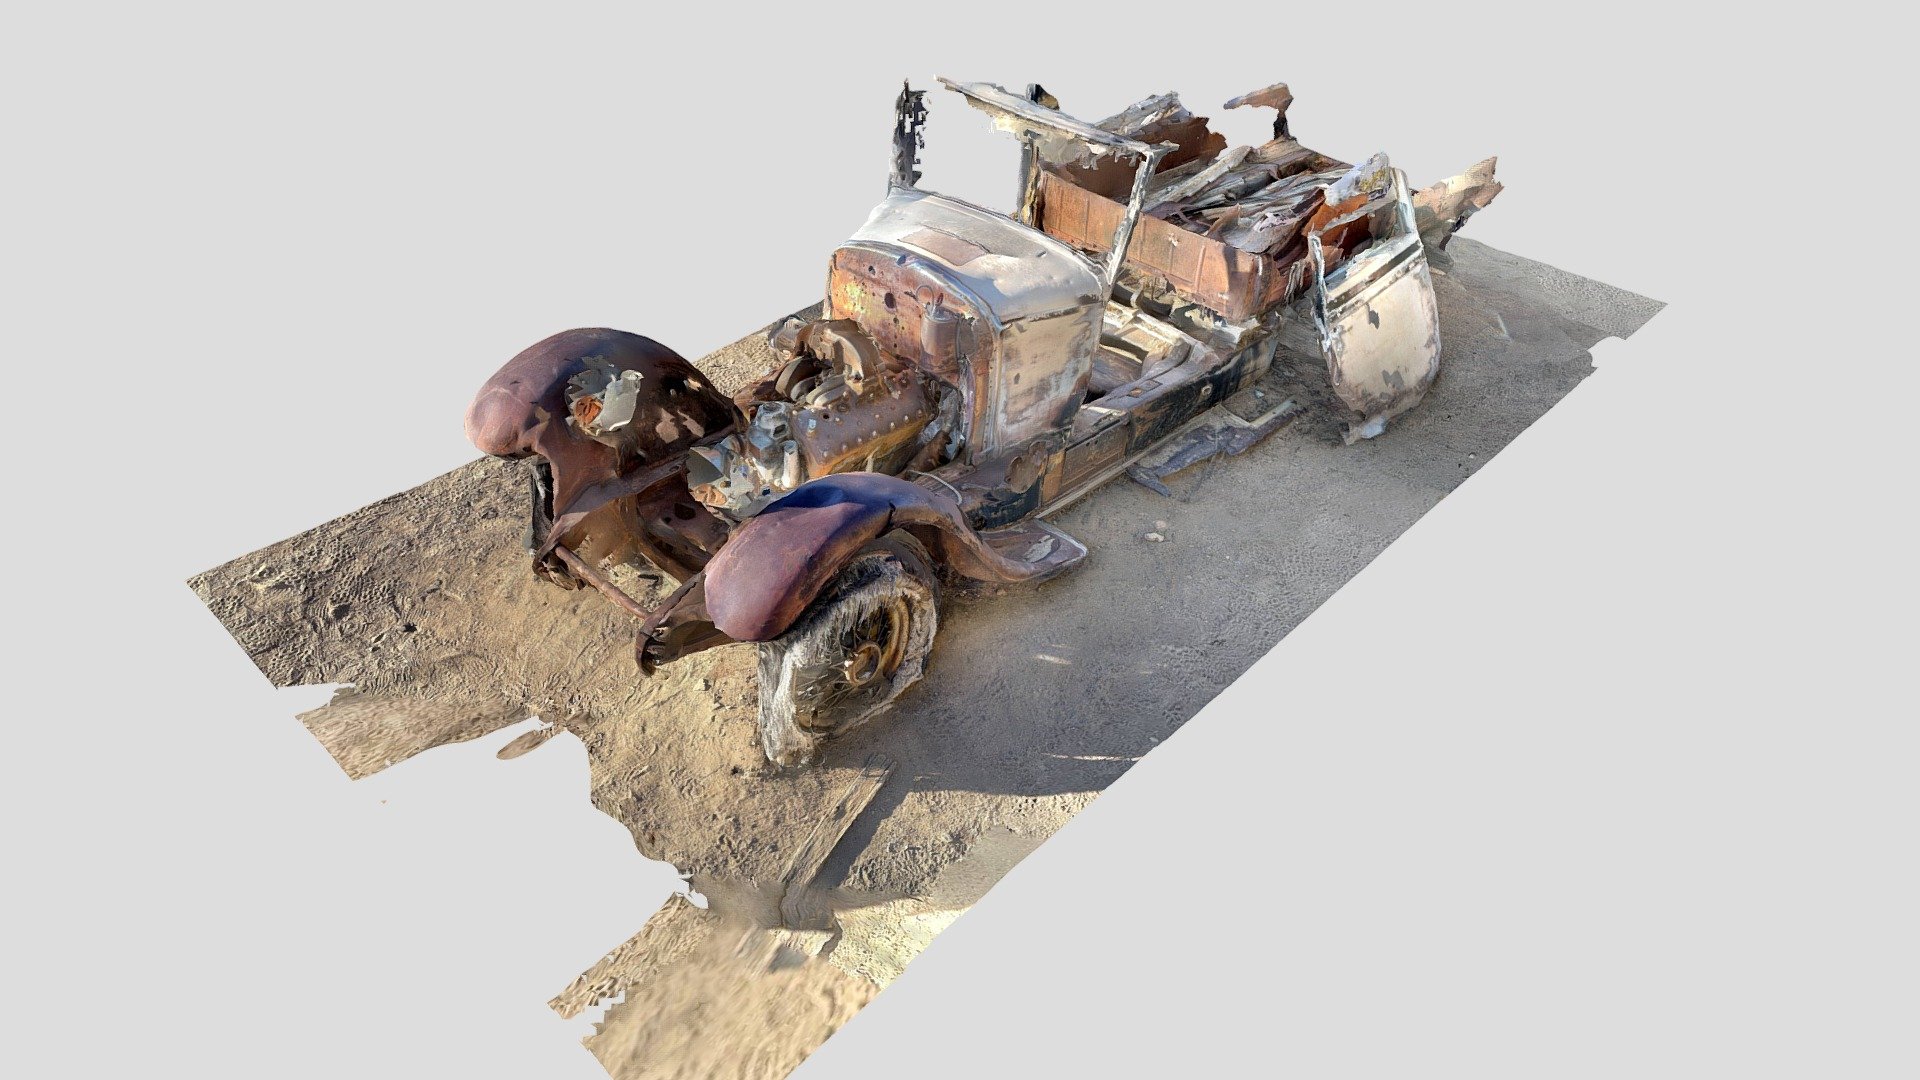 iPhone 12 Pro Max lidar. Found in Joshua tree national park
I also did a traditional photogrammetry scan to go with it. 

Created with Polycam.ai - Rusted jalopy iPhone lidar scan - Download Free 3D model by Austin Beaulier (@Austin.Beaulier) 3d model